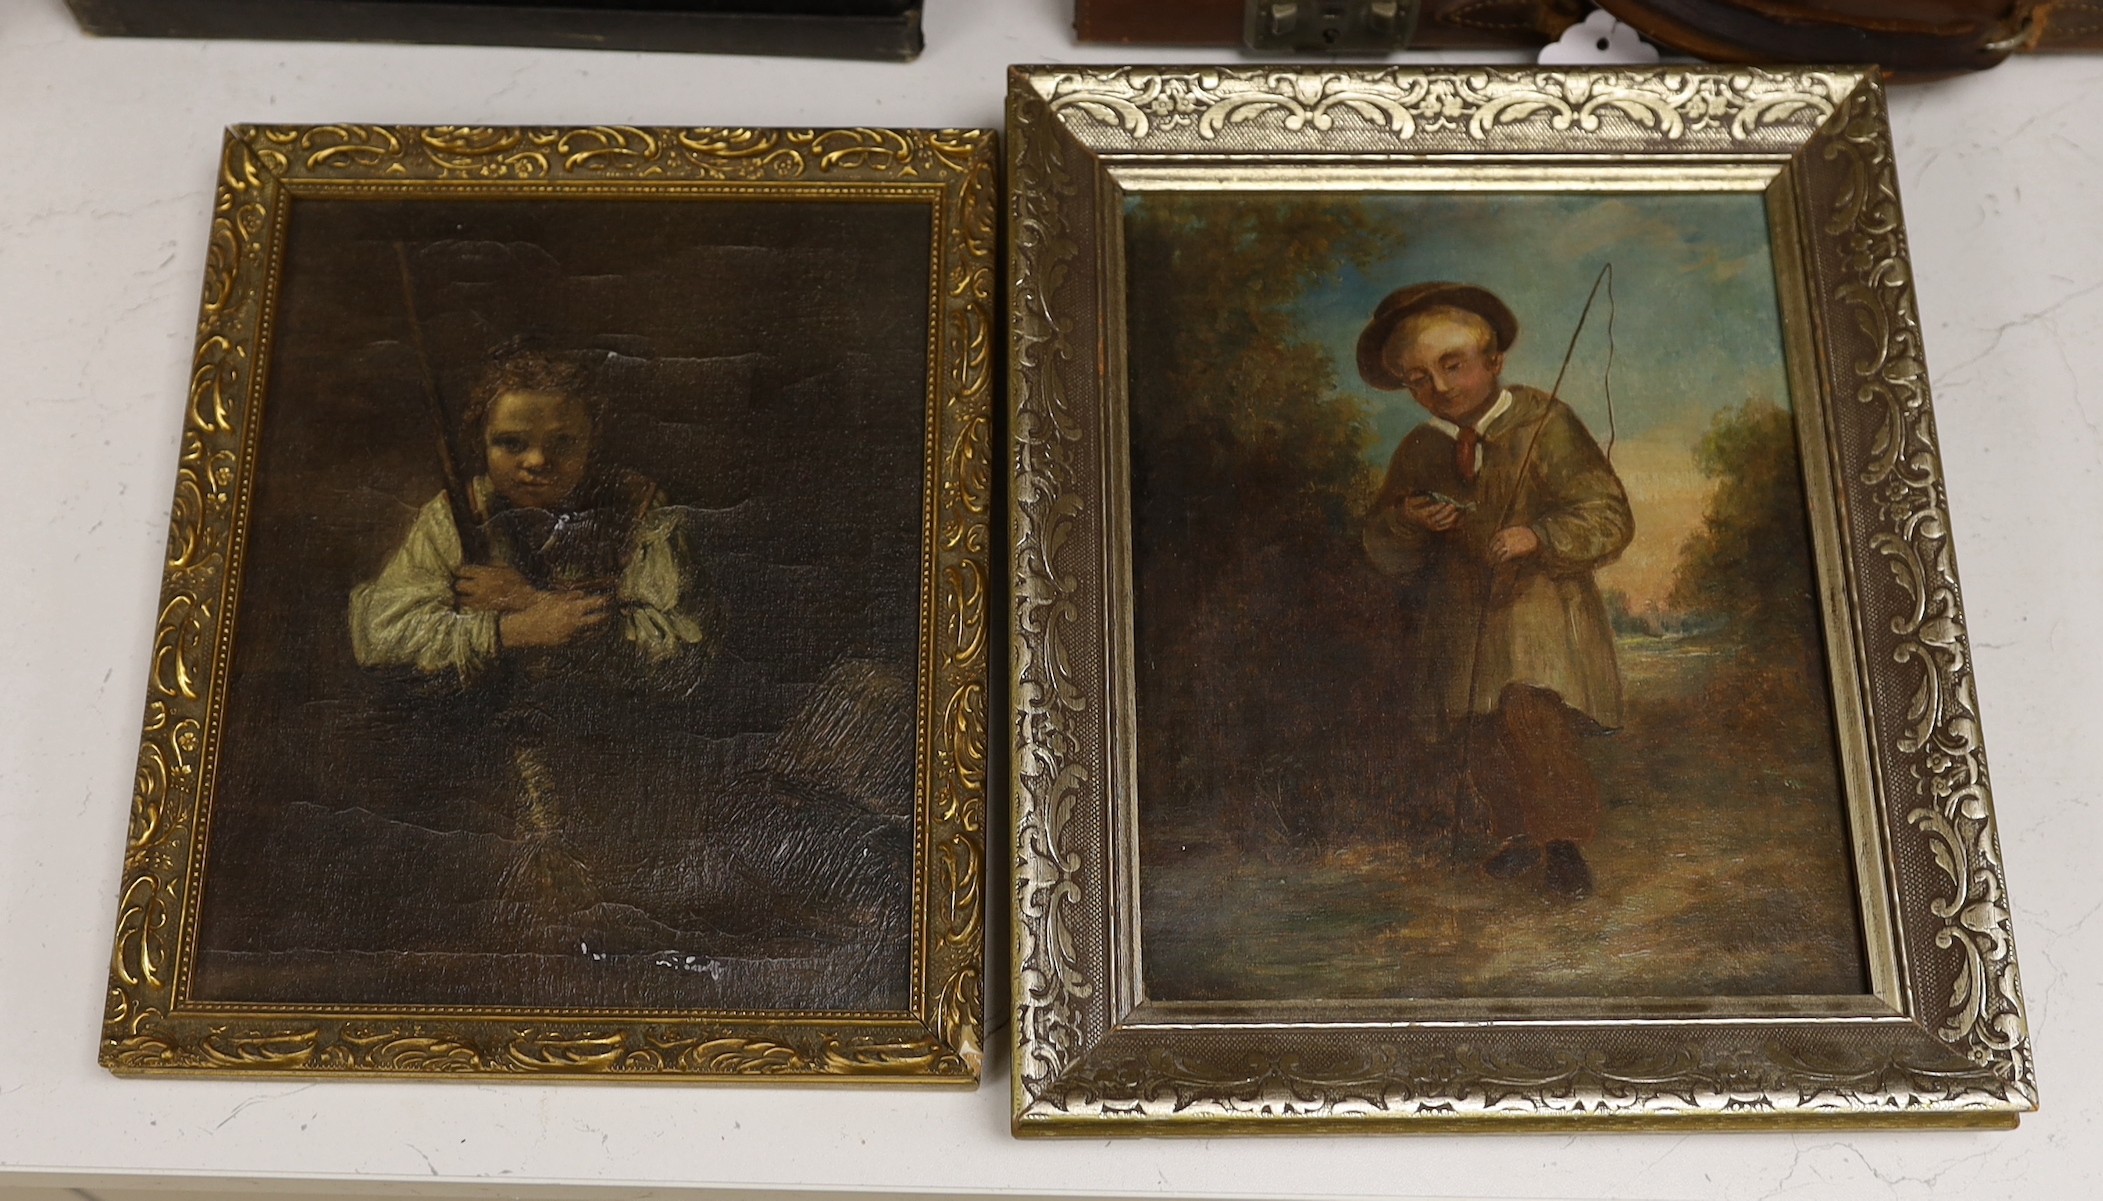 19th century English School, oil on canvas, Study of a boy angler, 24 x 19cm and an oleograph after Rembrandt